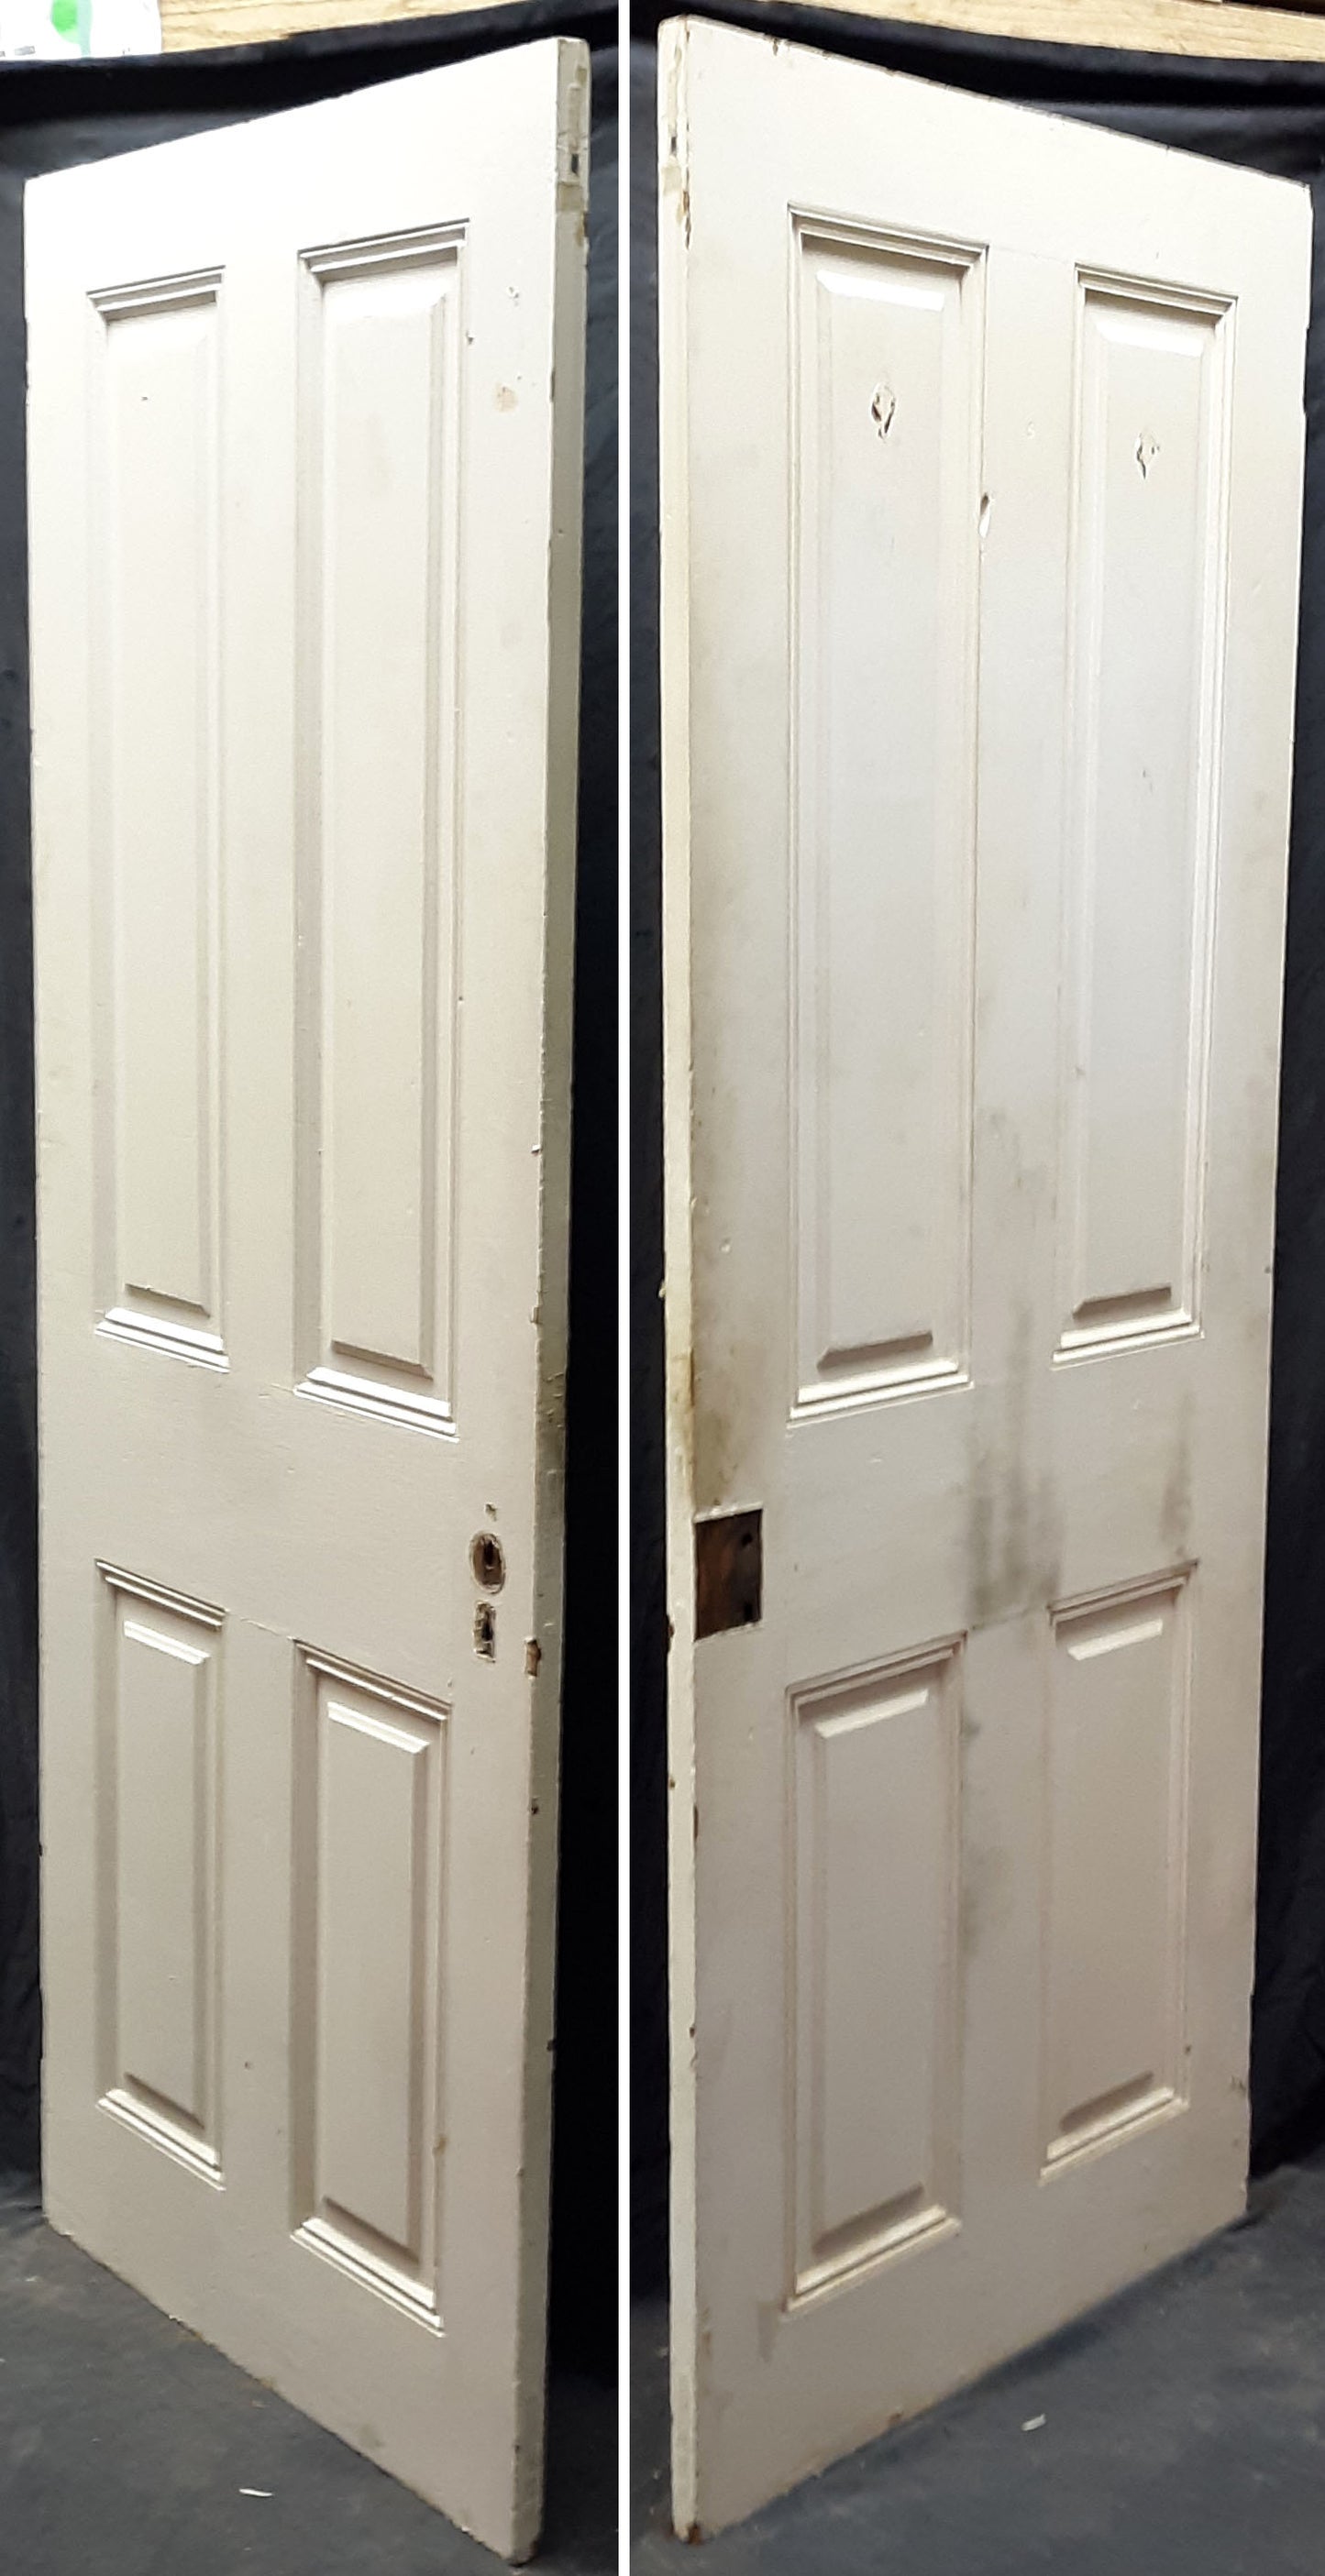 3 available 32"x79" Antique Vintage Old Salvaged Reclaimed Victorian SOLID Wood Wooden Interior Doors 4 Four Raised Panels